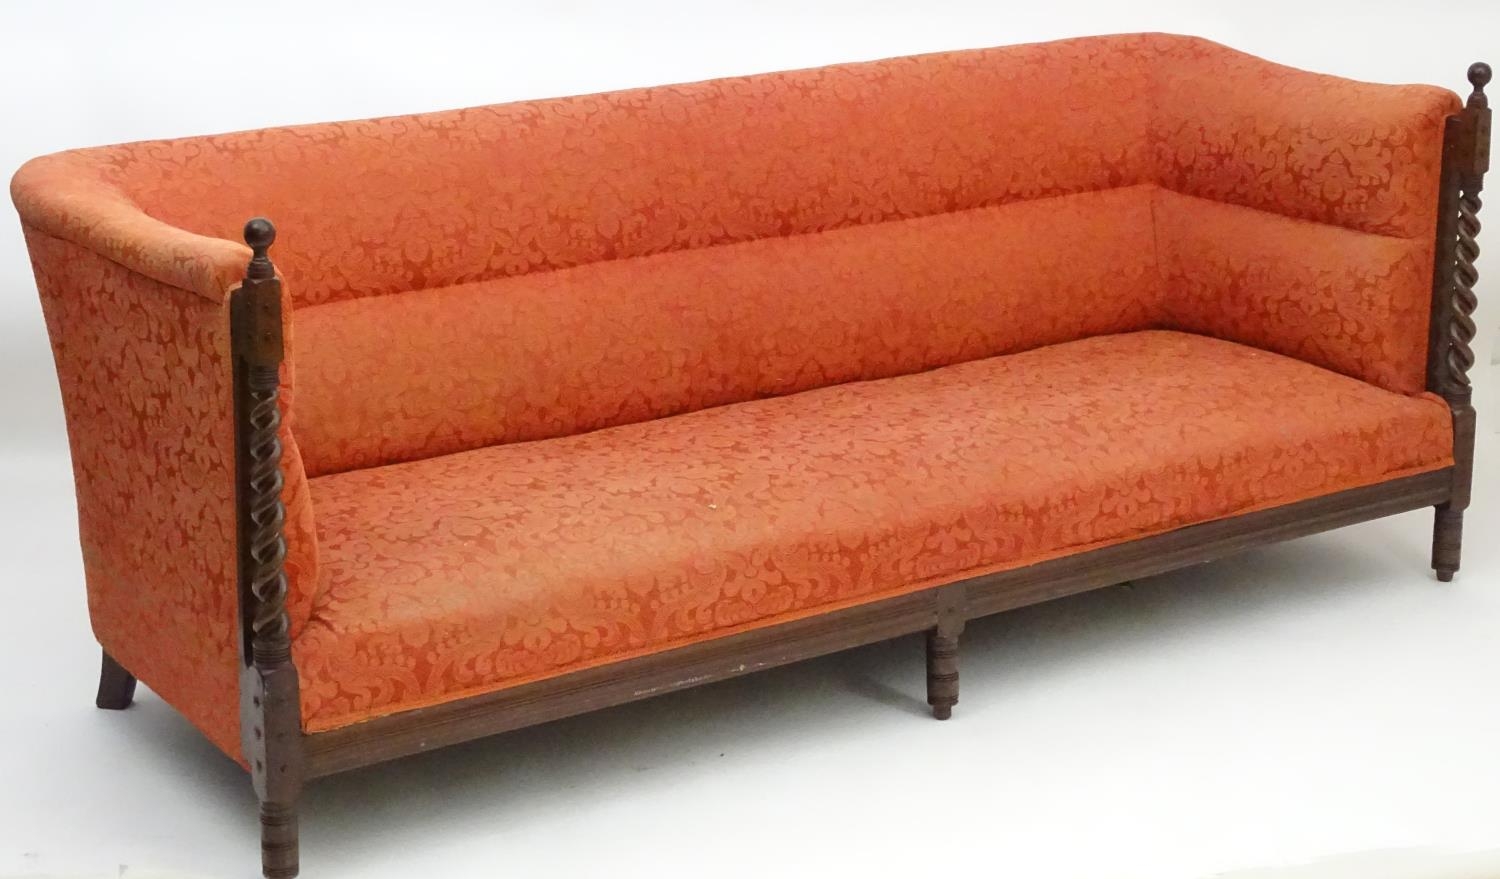 A late 19thC Arts & Crafts three seat sofa with turned barley twist pillars to the front with turned